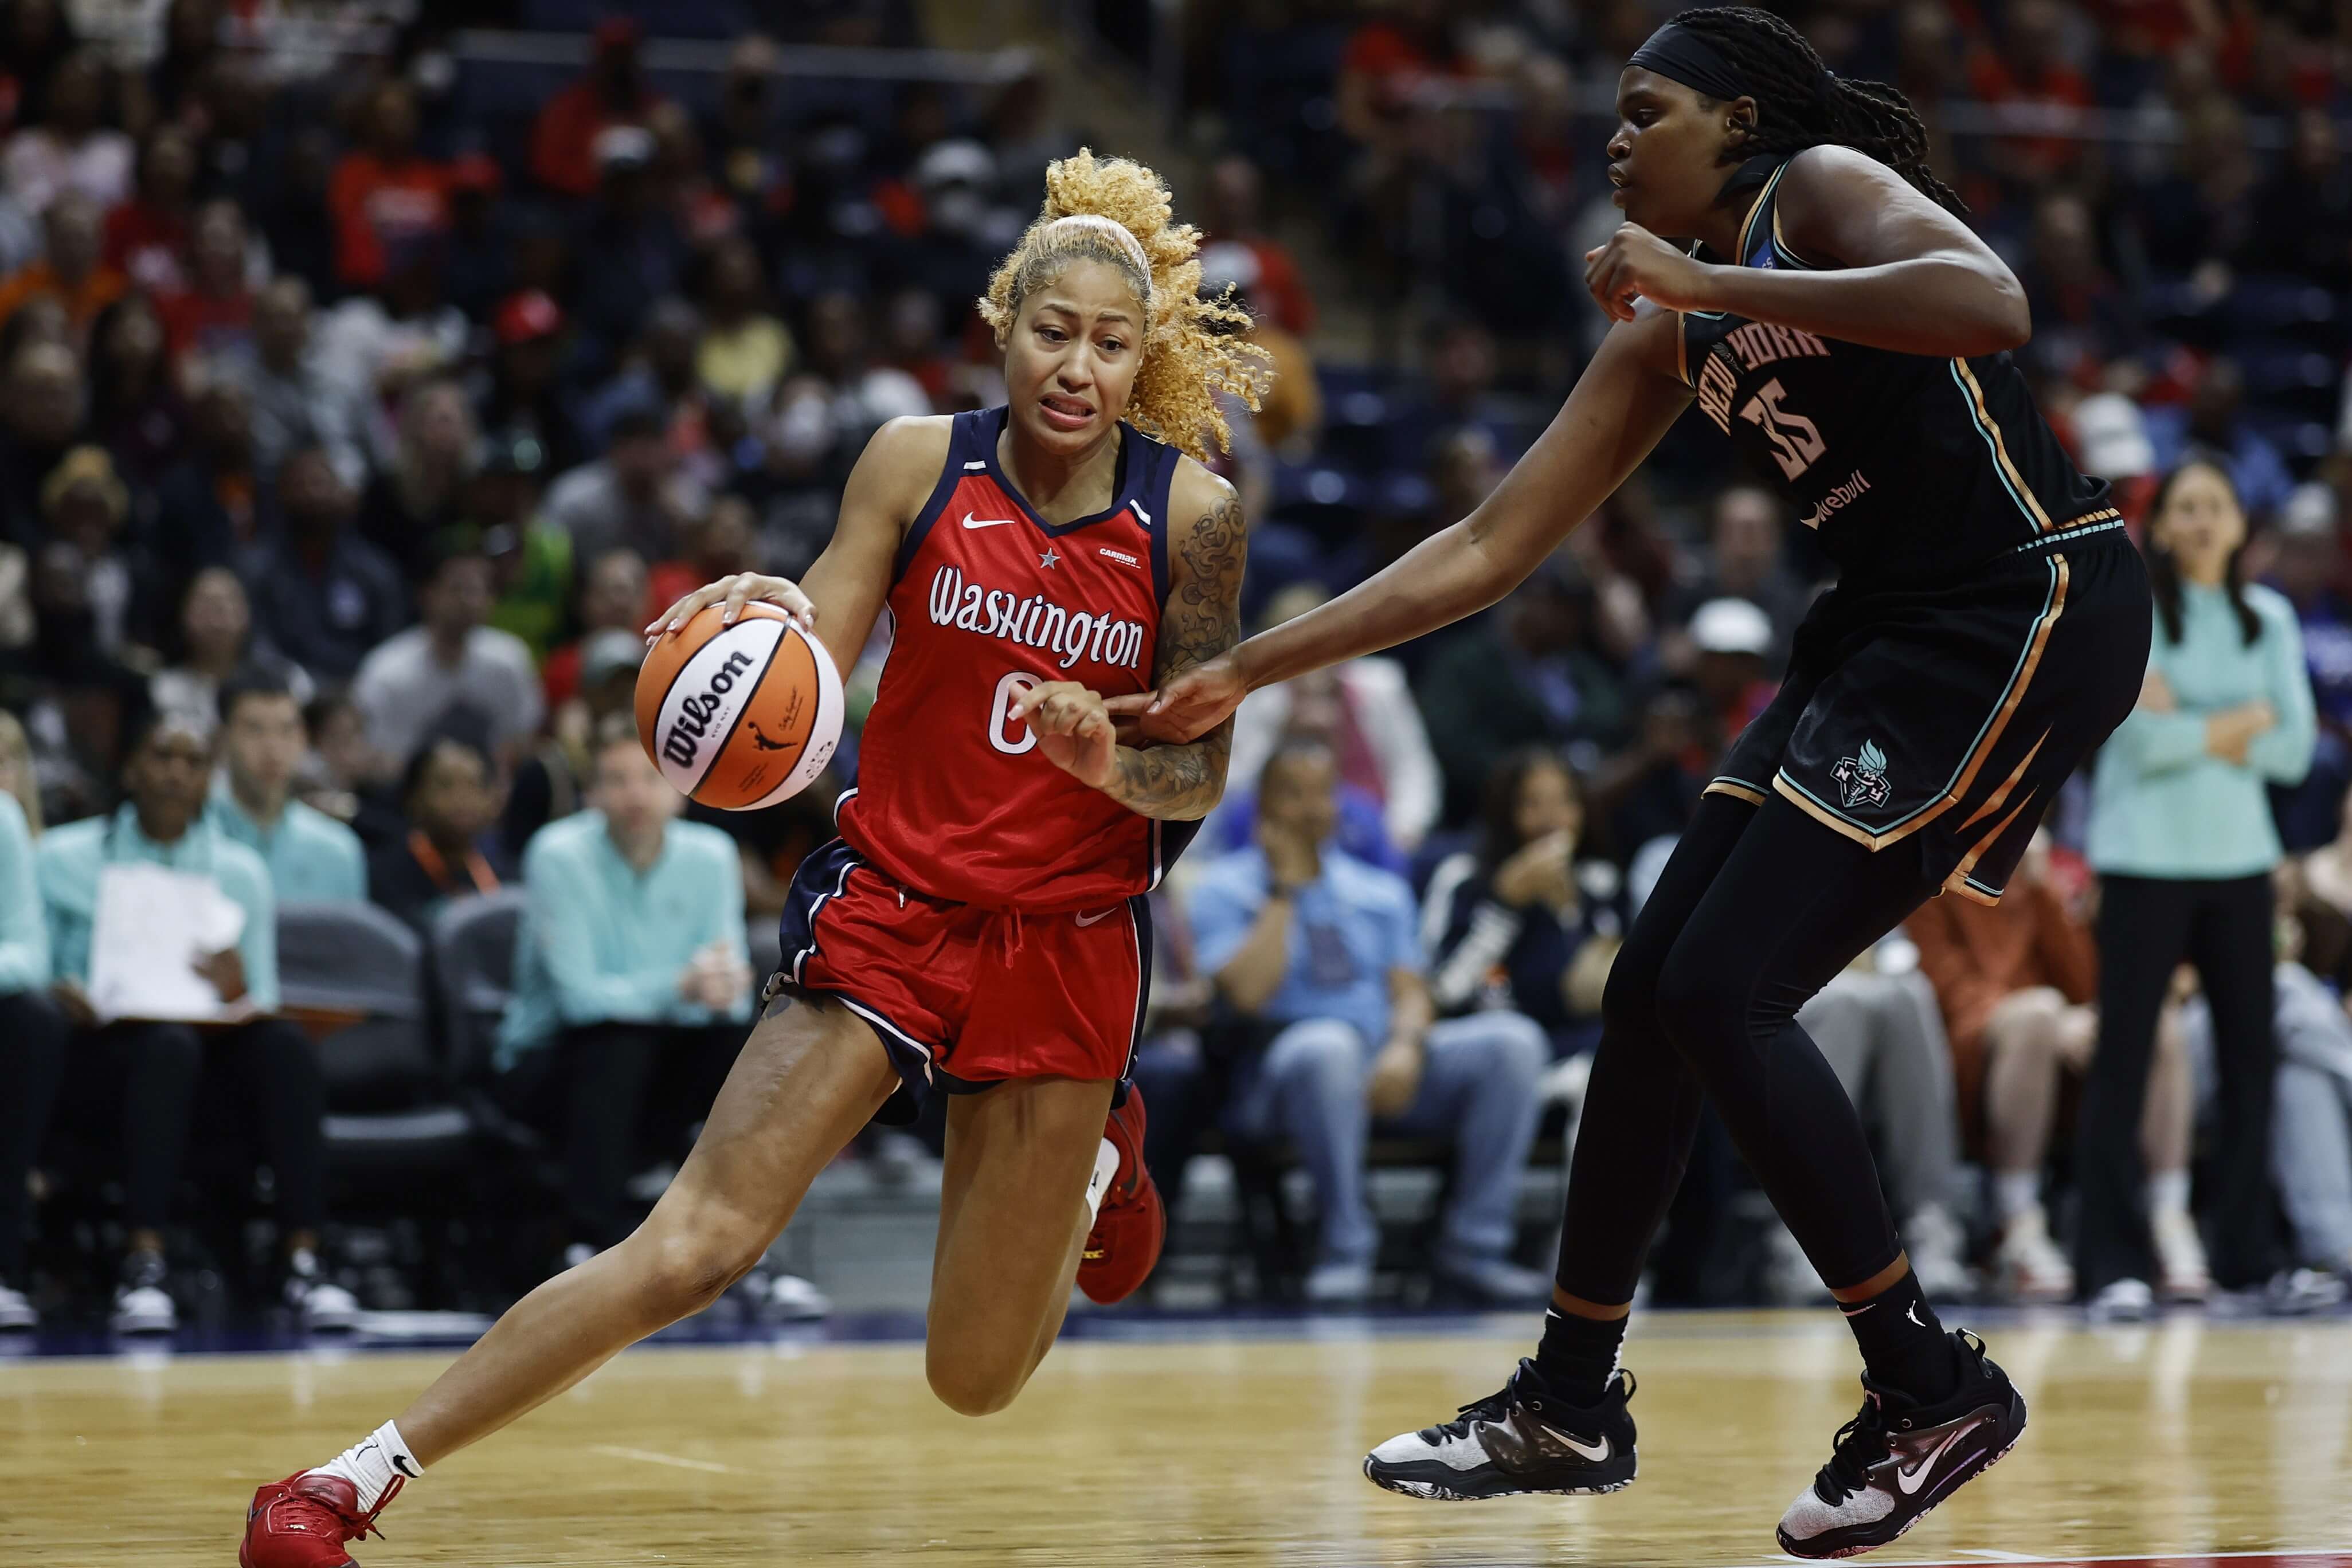 She's got sole: the current state of sneakers in the WNBA